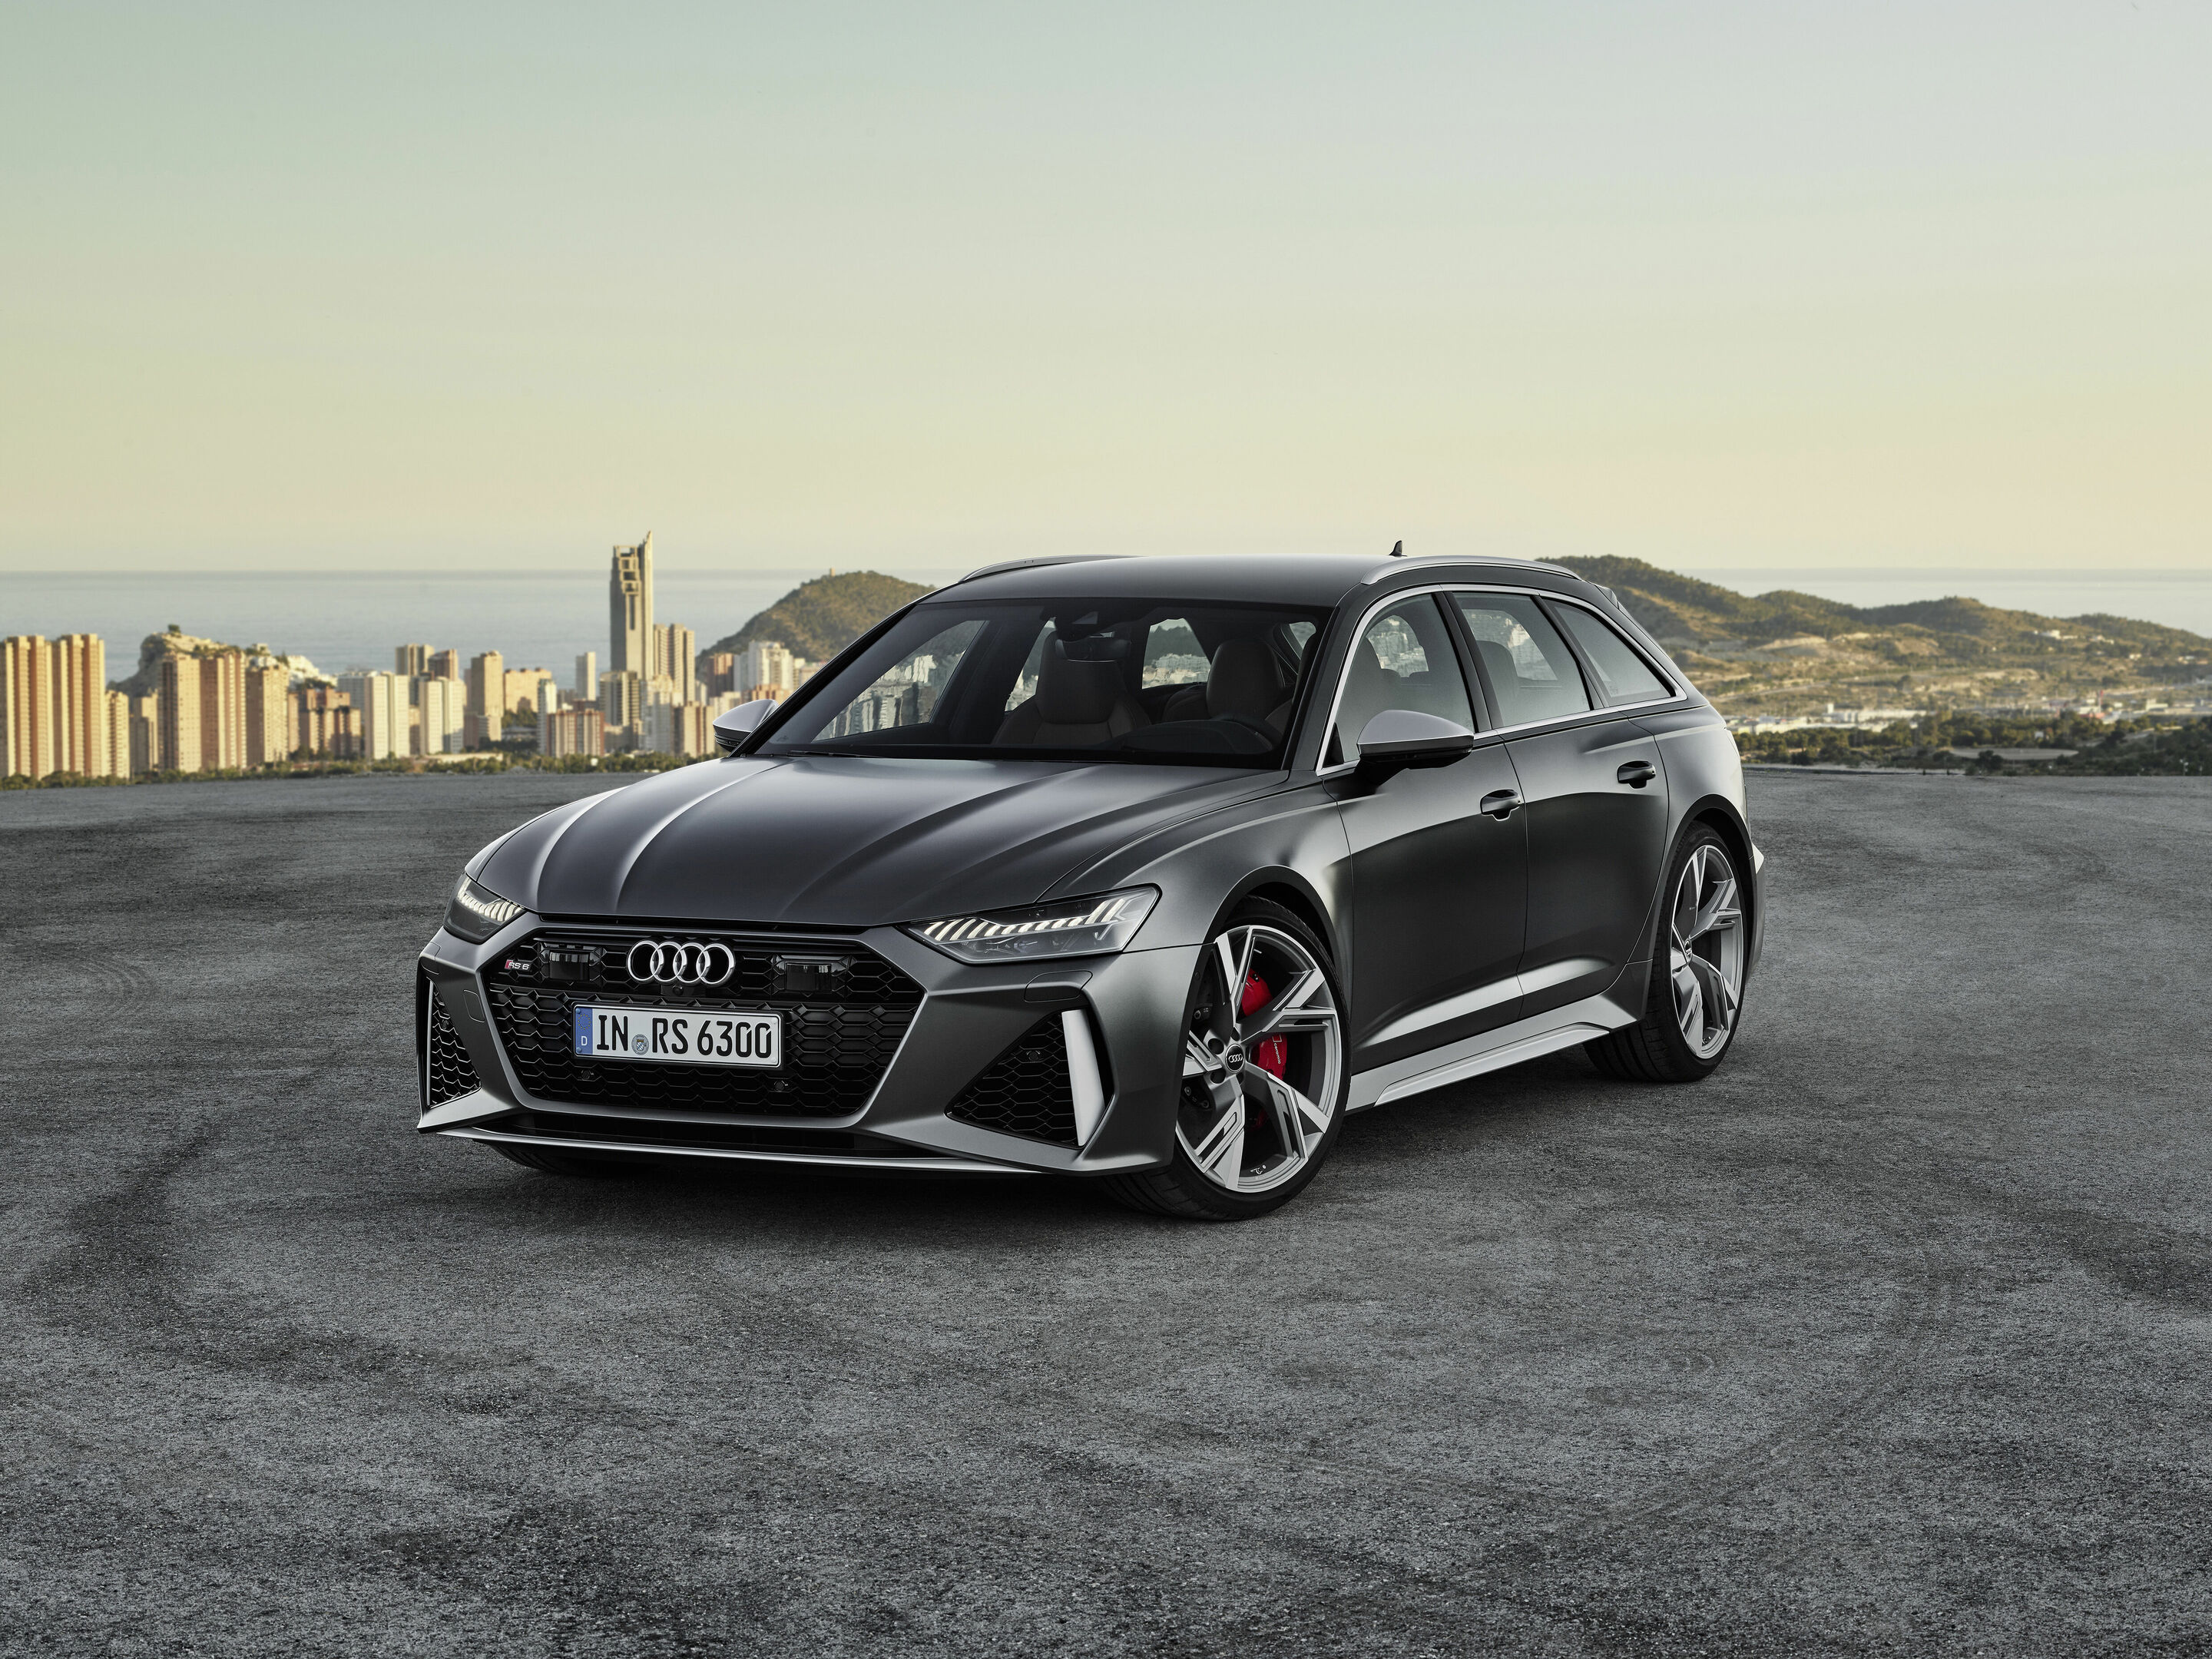 The fourth generation of the RS icon: the new Audi RS 6 Avant